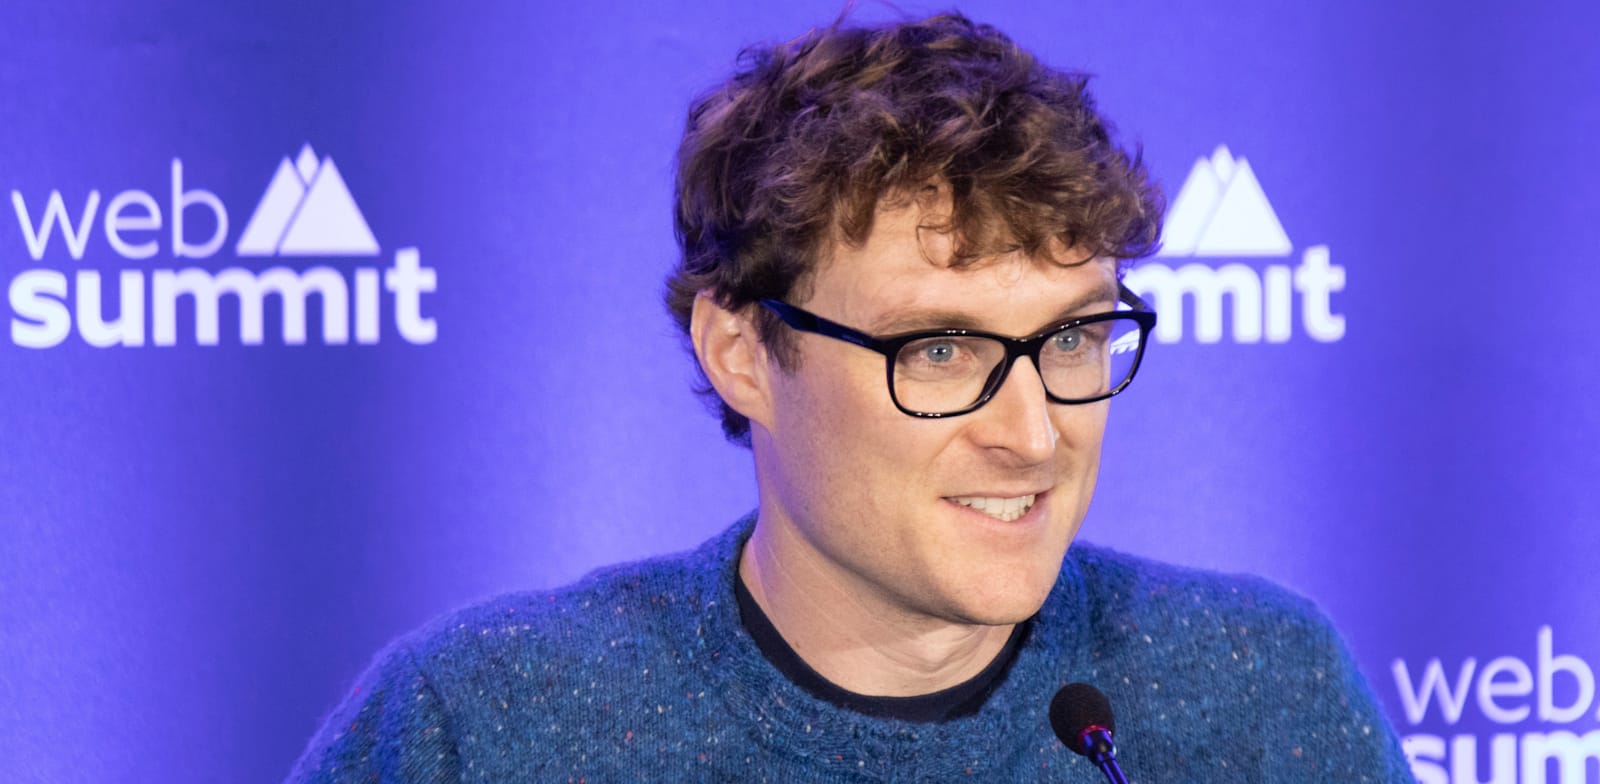 Web Summit founder Paddy Cosgrave credit: Shutterstock